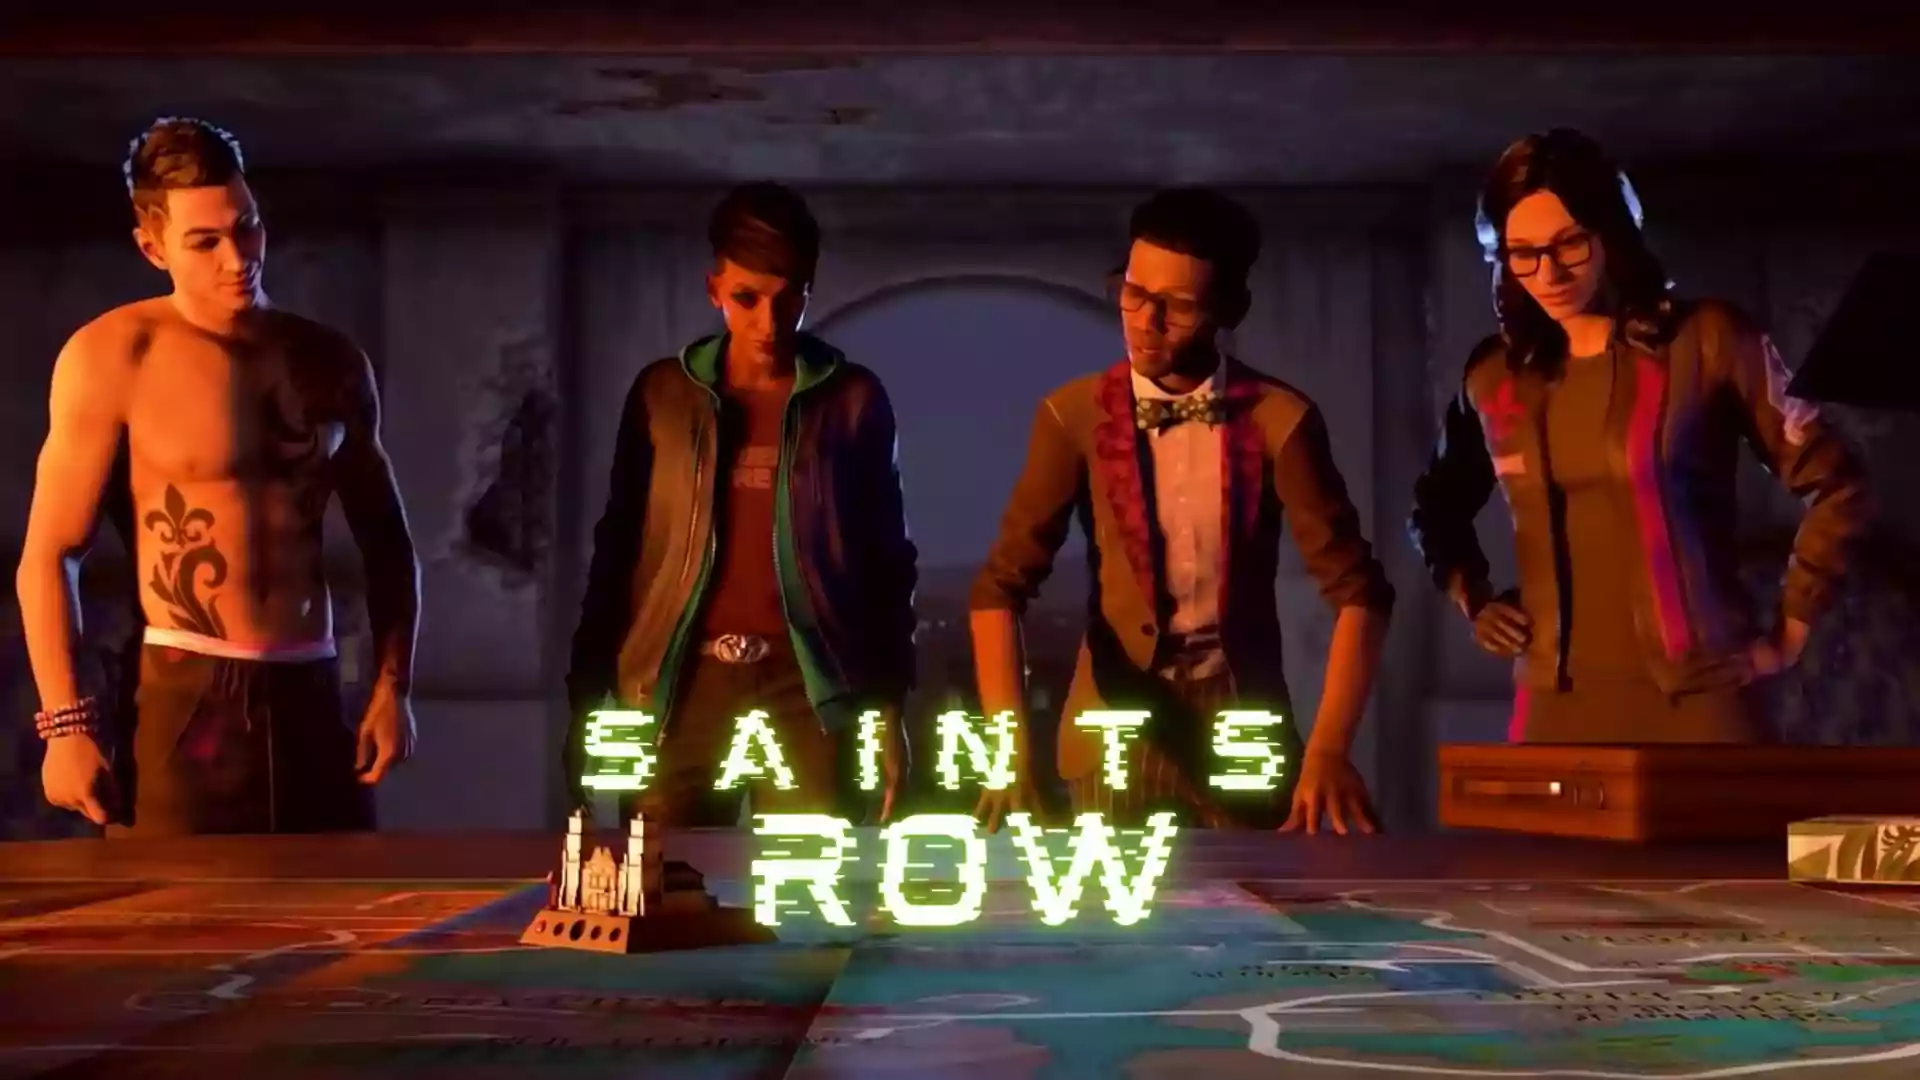 Saints Row parents guide and age rating